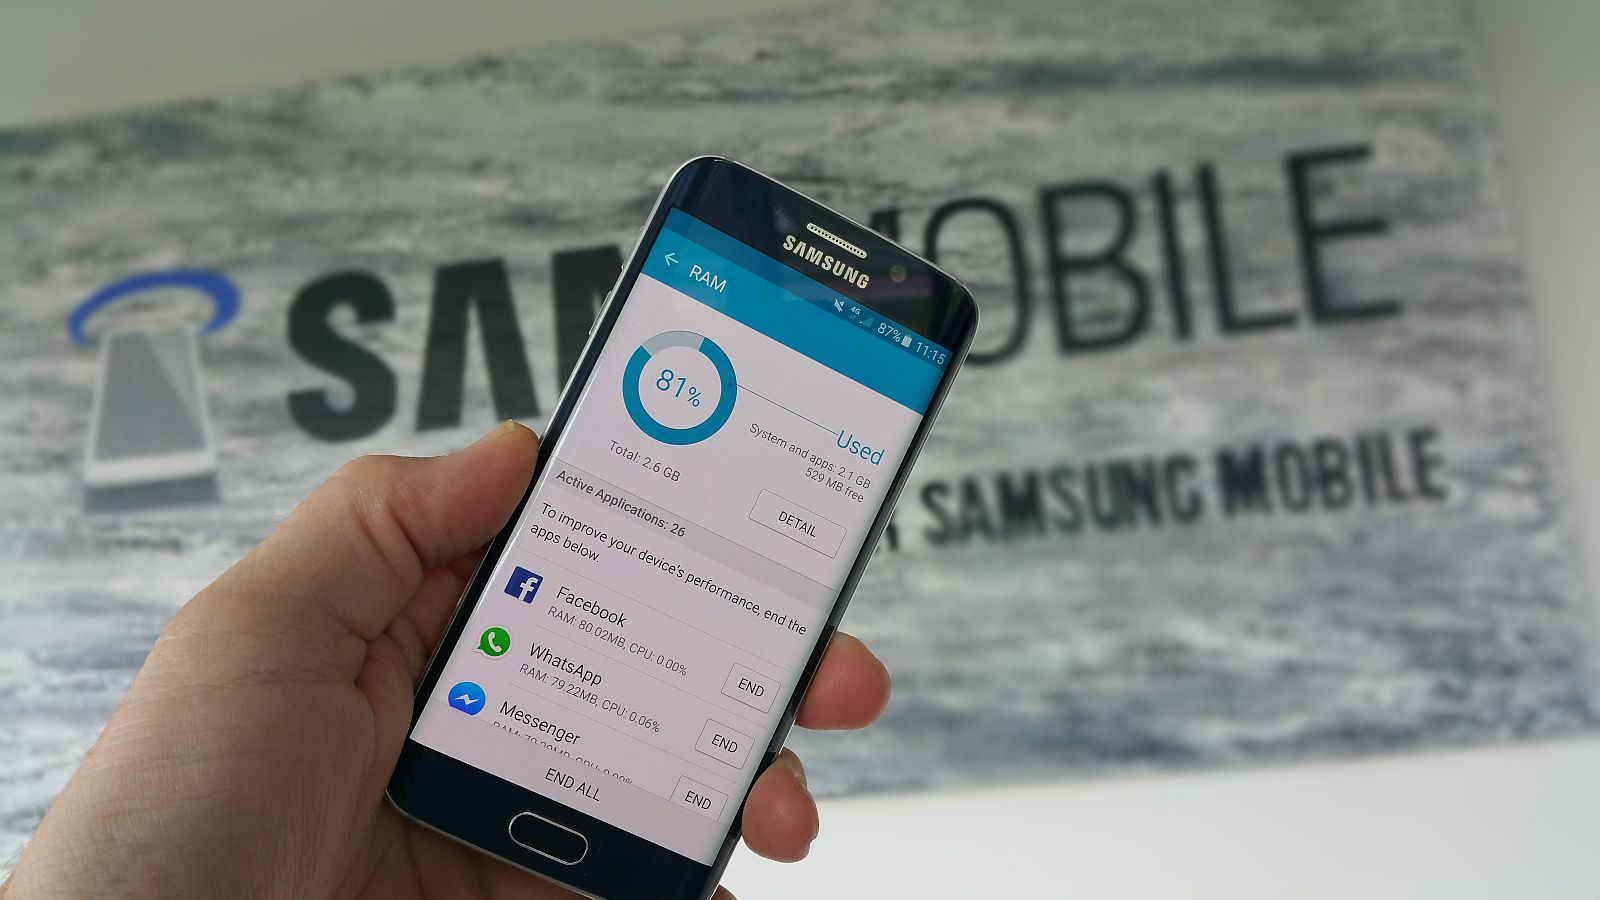 The RAM issue the Galaxy S6 and edge might a 'feature' - SamMobile - SamMobile